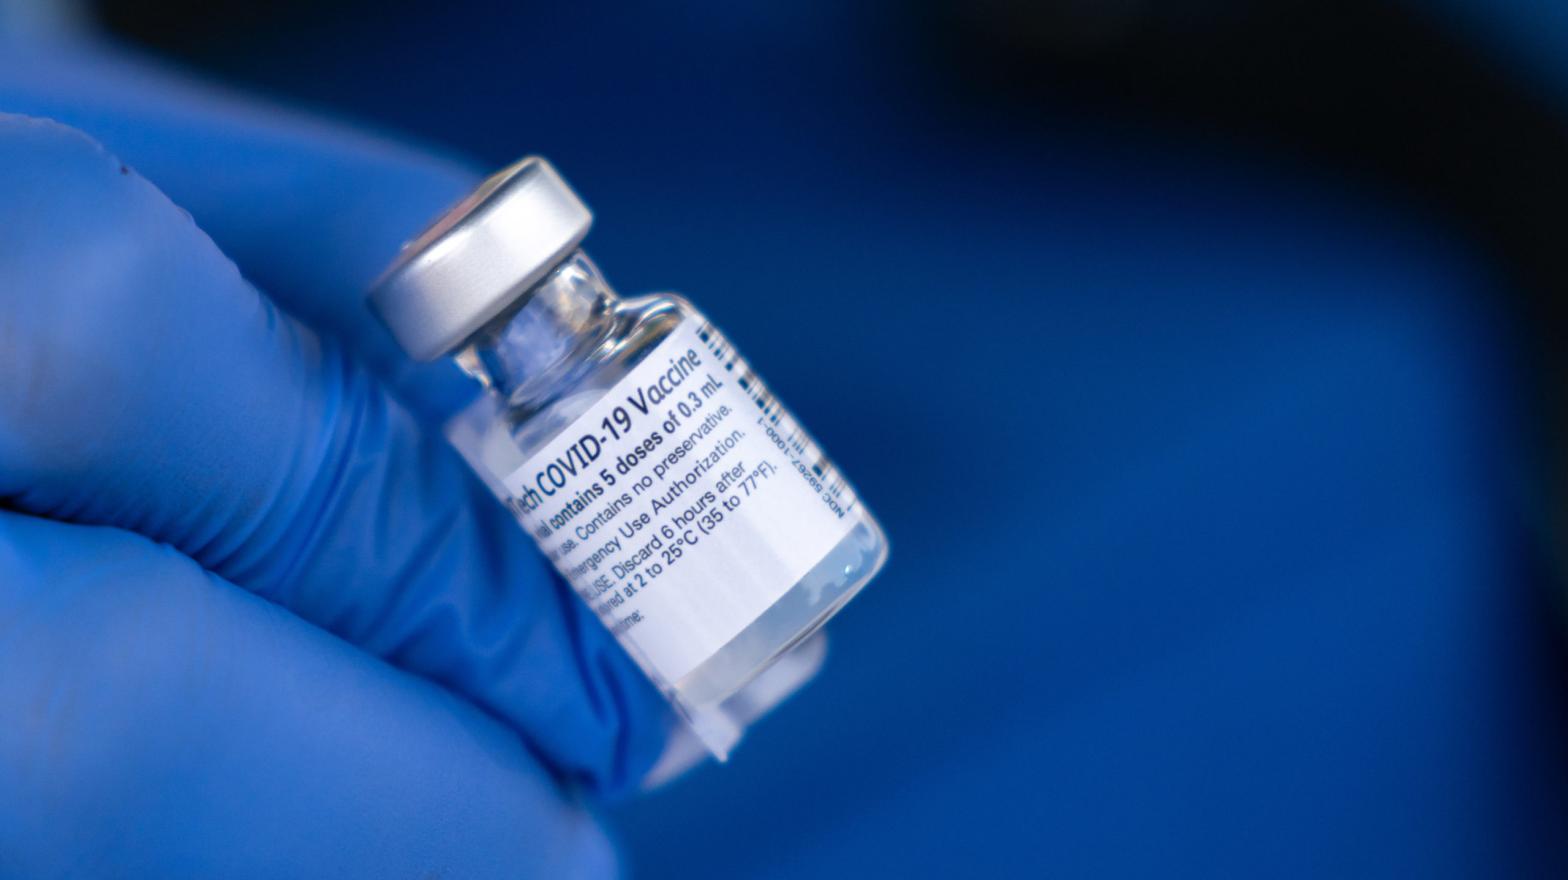 A nurse shows off a vial of the Pfizer-BioNTech covid-19 vaccine outside of the Chatham County Health Department on Dec. 15, 2020 in Savannah, Ga. (Photo: Sean Rayford, Getty Images)